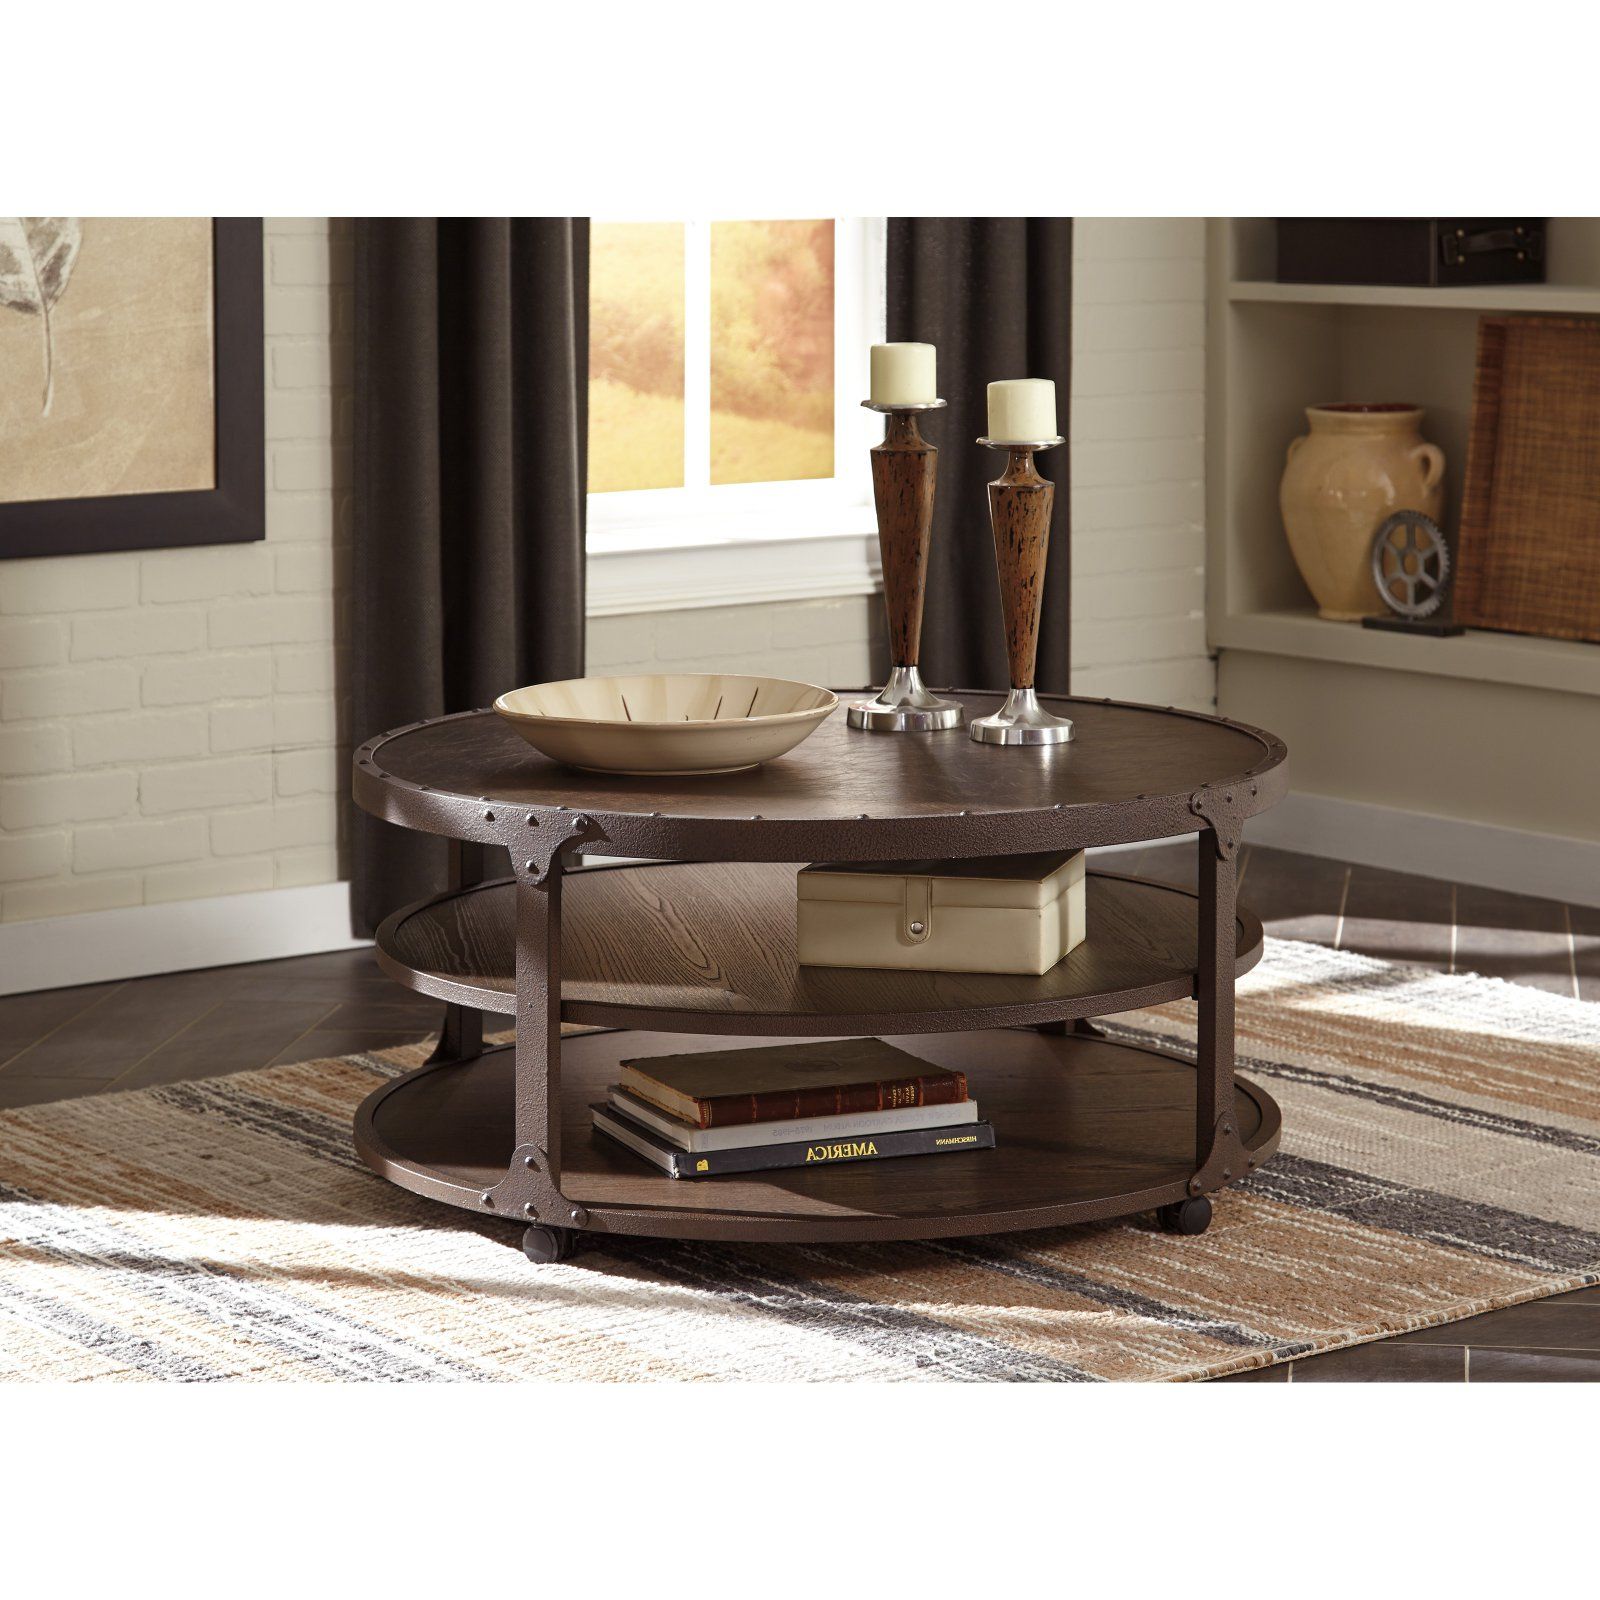 2019 Signature Designashley Shofern Round Cocktail Table Regarding Barnside Round Cocktail Tables (View 3 of 20)